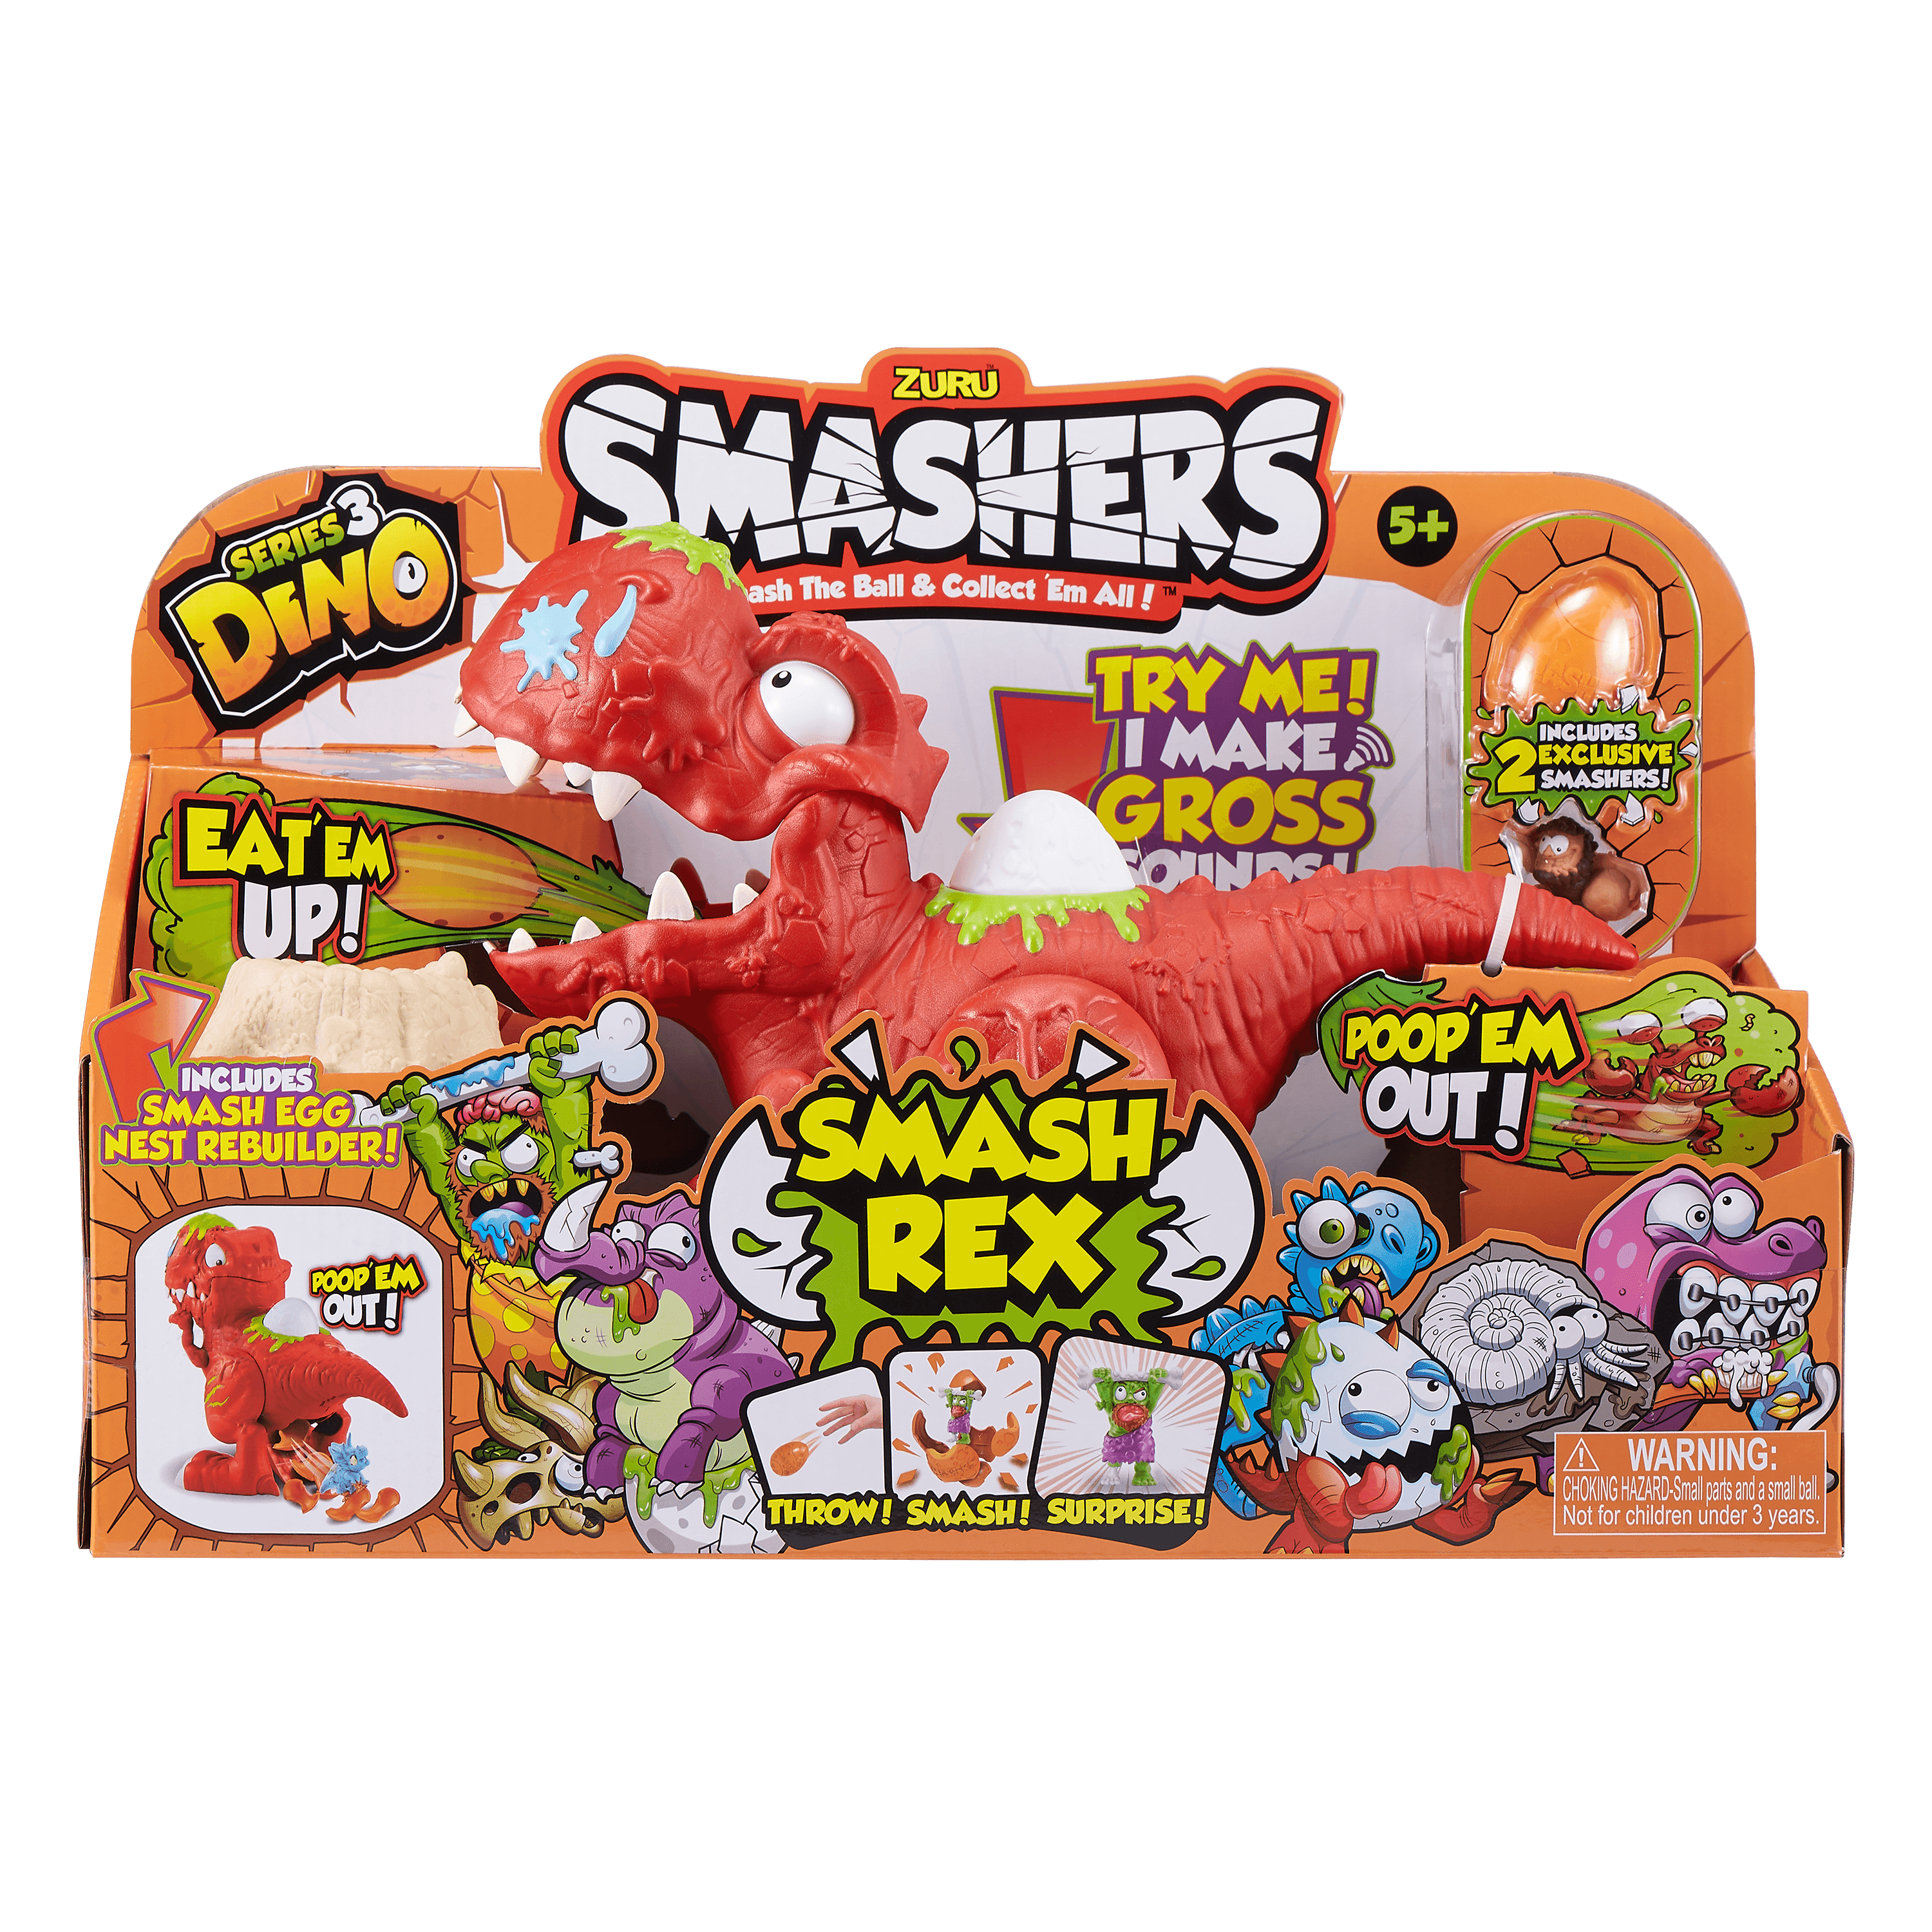 Set Of 3 Smash Crashers - Series 1 (Out Of 50 Collectibles)